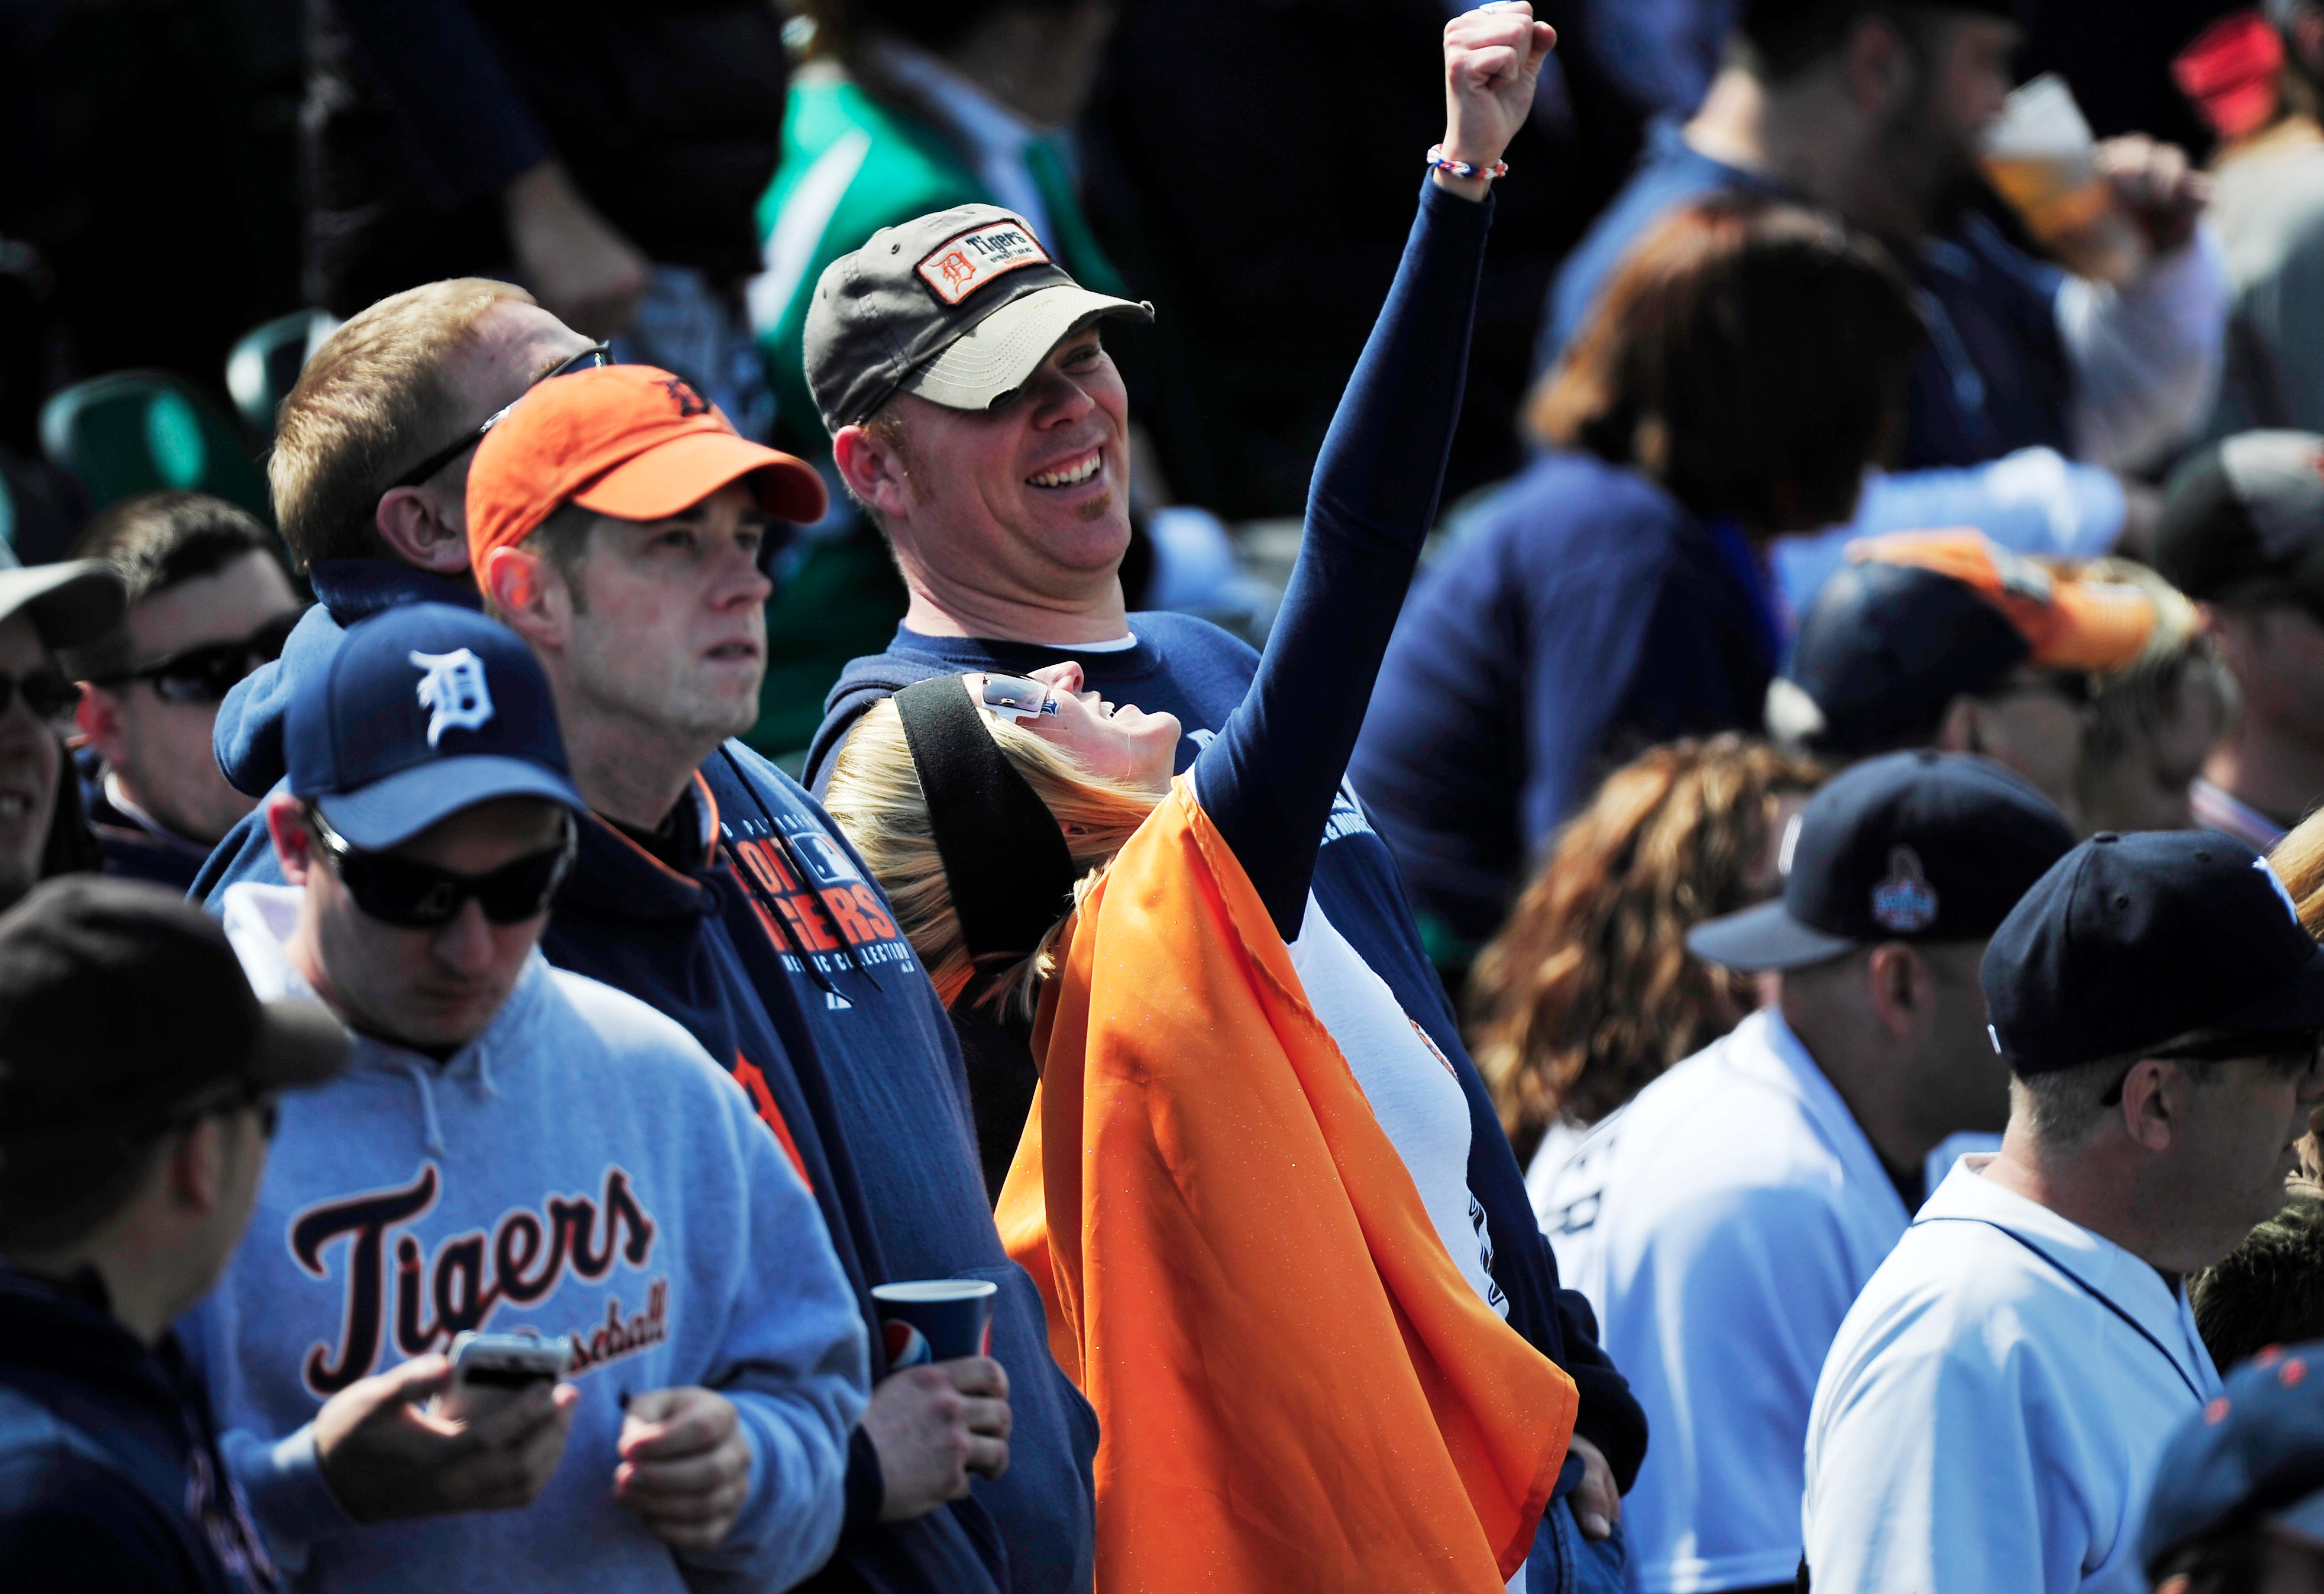 A super Tigers fans enjoying the sun, the Tigers victory or both, throws a fist into the air on the Detroit Tigers season opening at Comerica Park. nning. Detroit Tigers Opening Day vs the Kansas City Royal at Comerica Park in Detroit, Michigan on March 31, 2014.